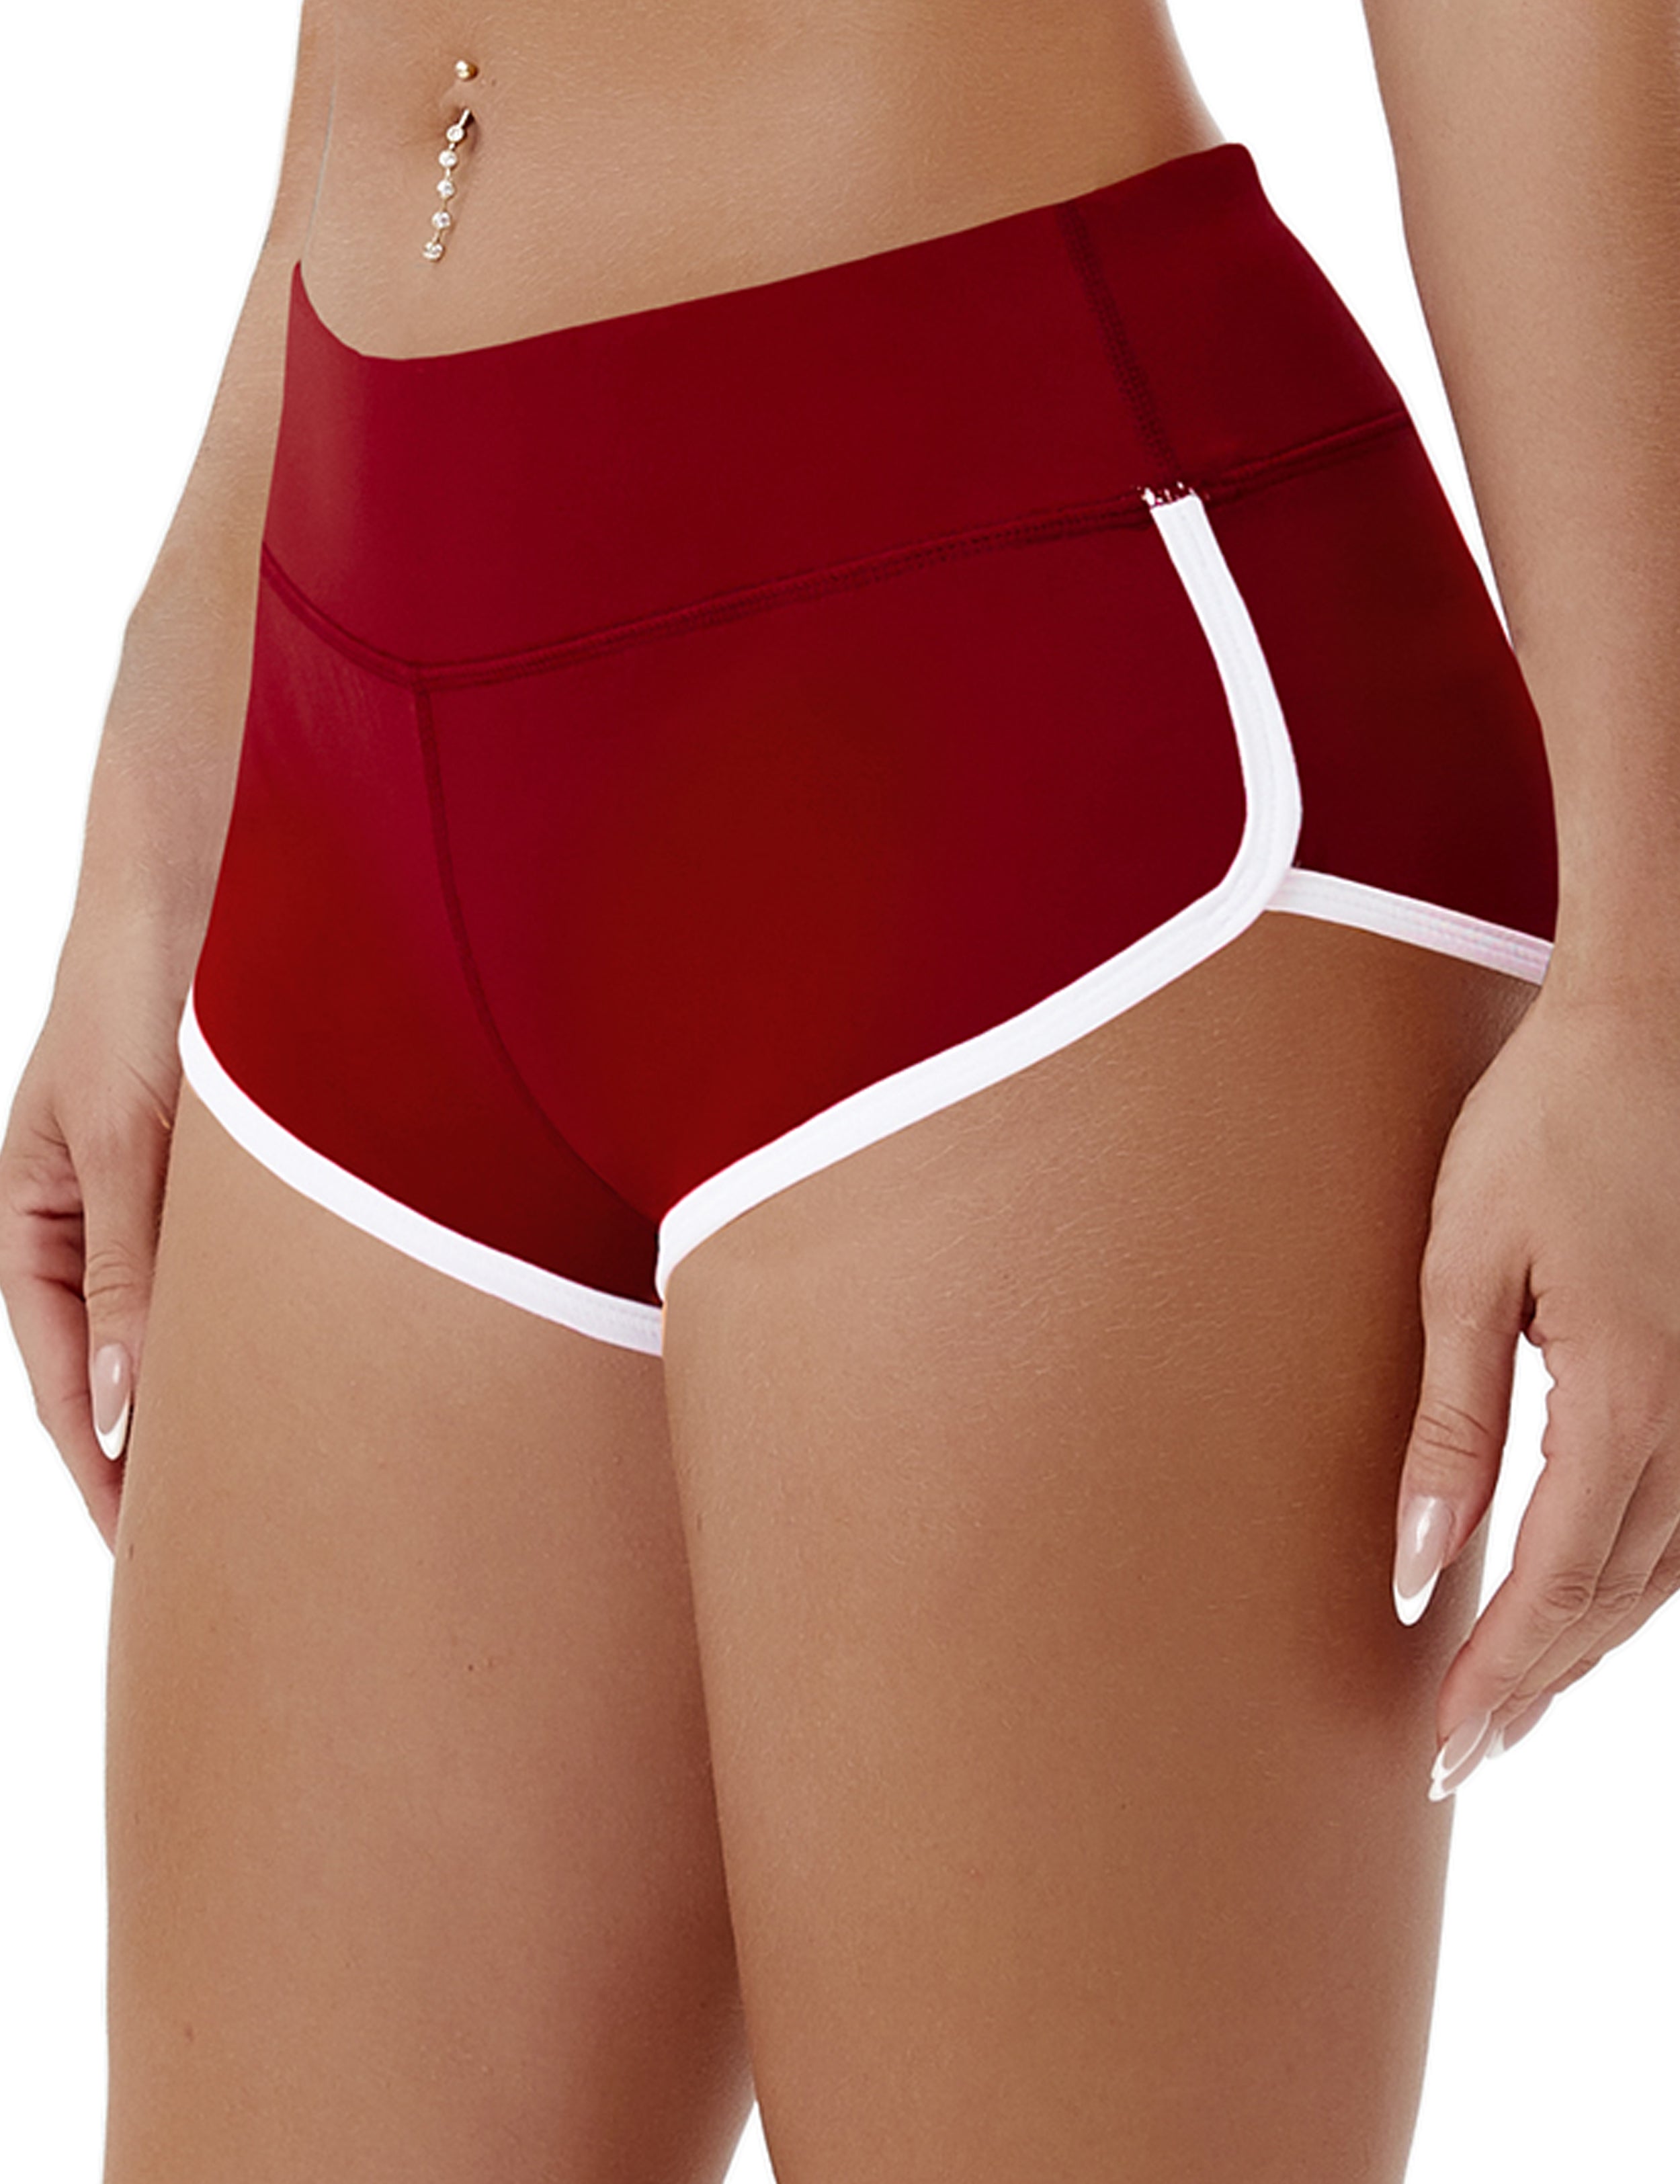 Sexy Booty Jogging Shorts cherryred Sleek, soft, smooth and totally comfortable: our newest sexy style is here. Softest-ever fabric High elasticity High density 4-way stretch Fabric doesn't attract lint easily No see-through Moisture-wicking Machine wash 75%Nylon/25%Spandex